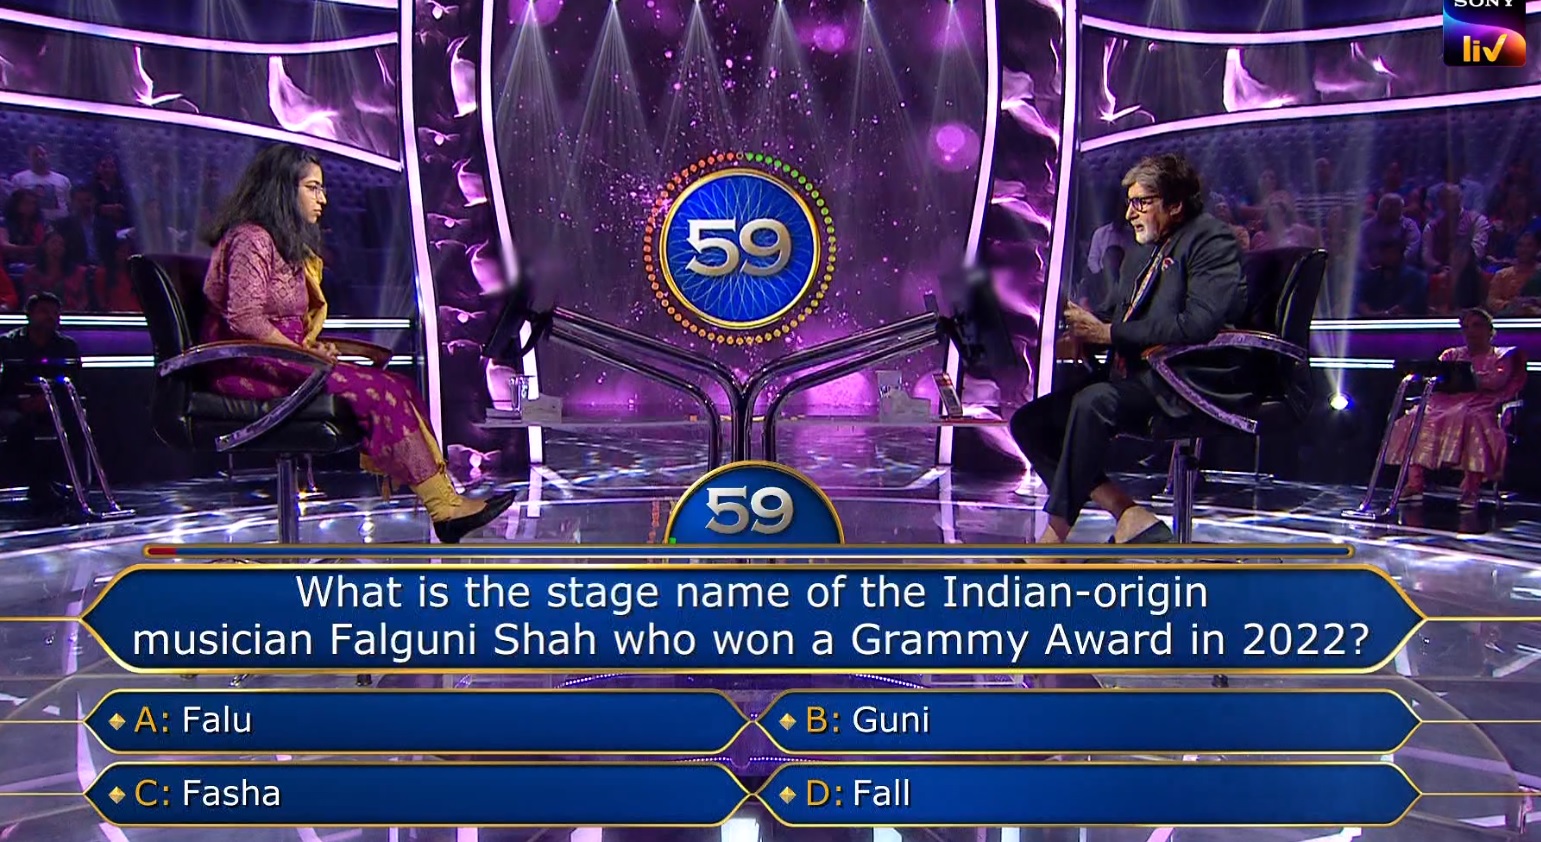 Ques : What is the stage name of the Indian-origin musician Falguni Shah who won a Grammy Award in 2022?